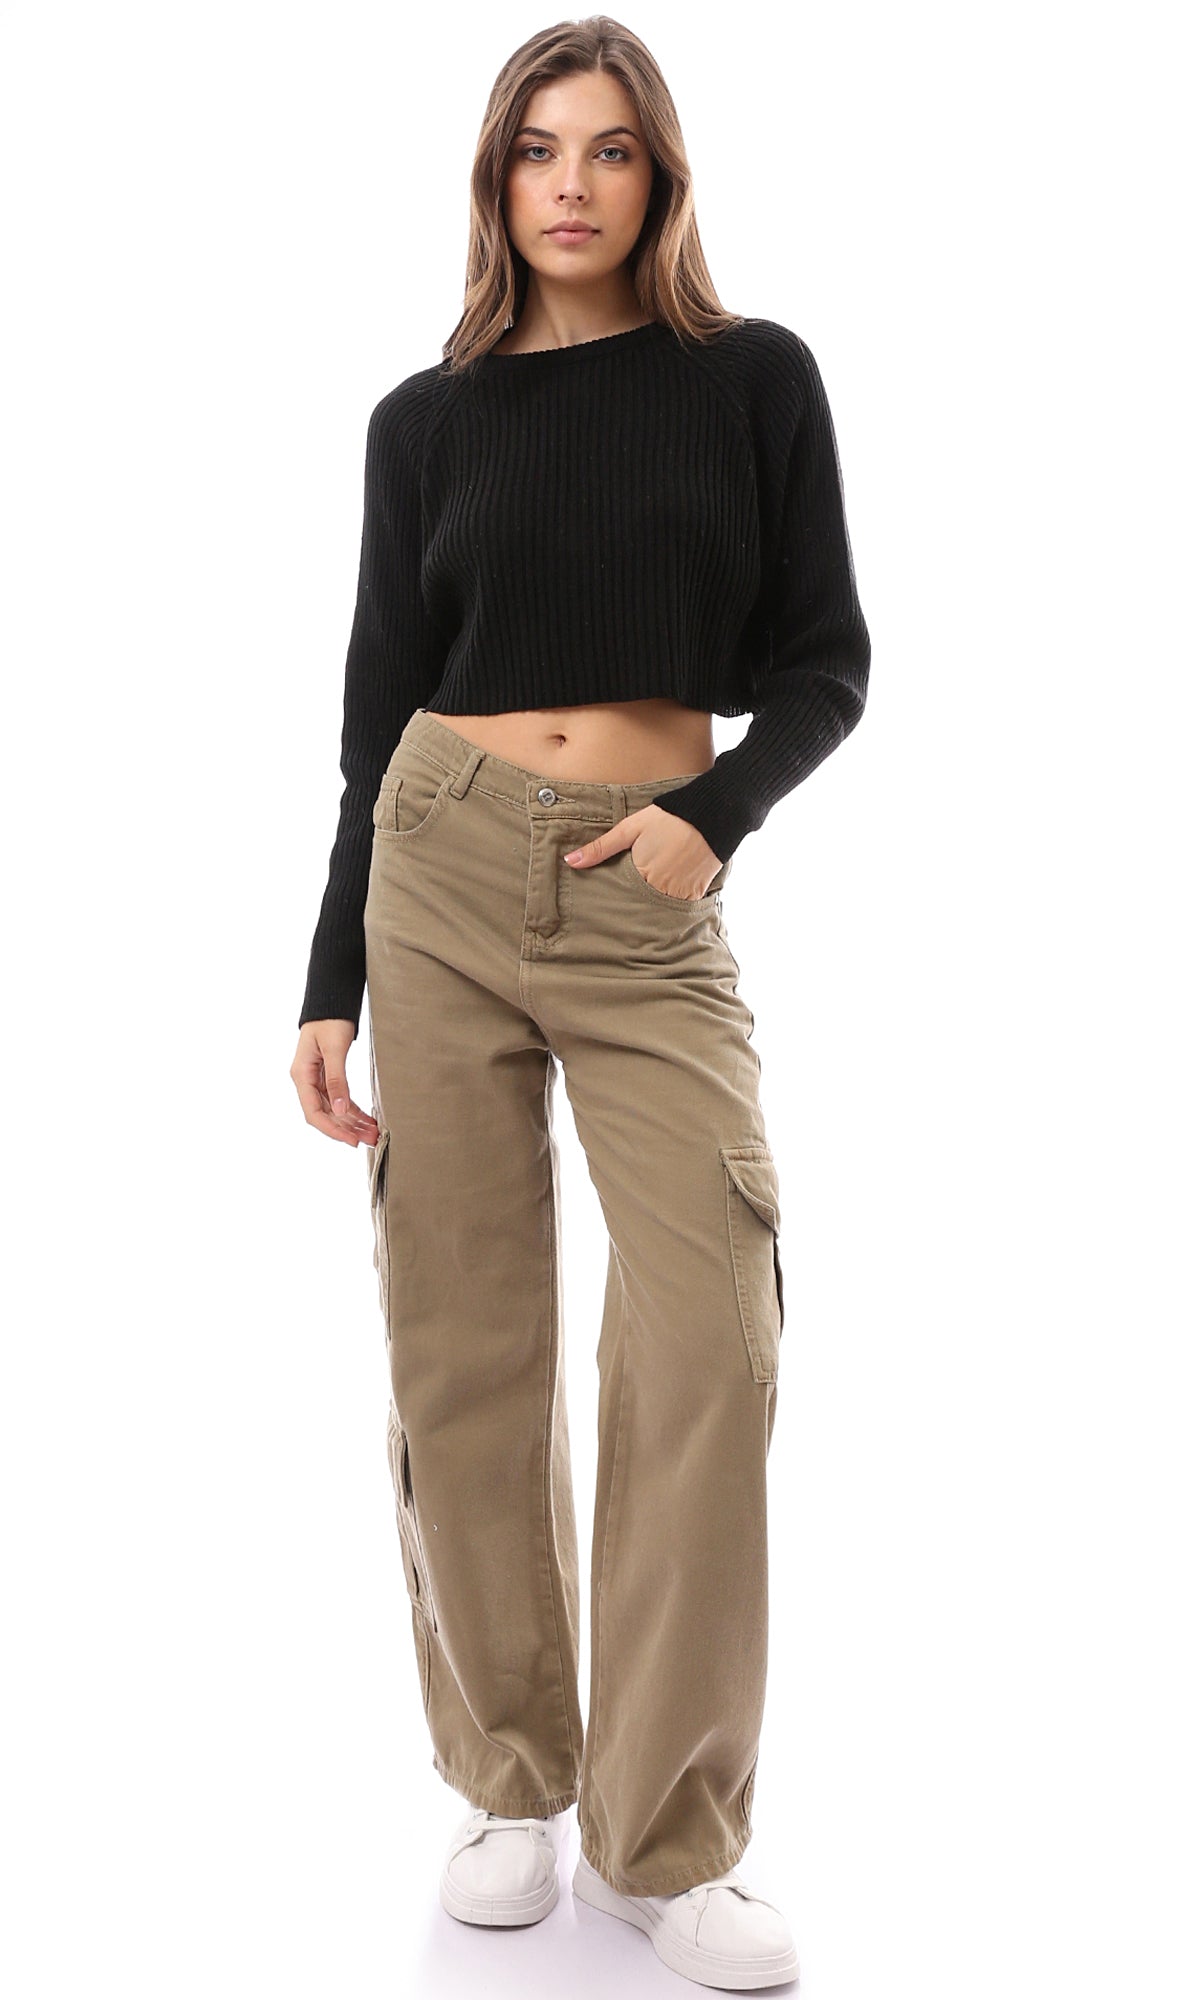 O171609 Black Slip On Long Sleeves Cropped Pullover